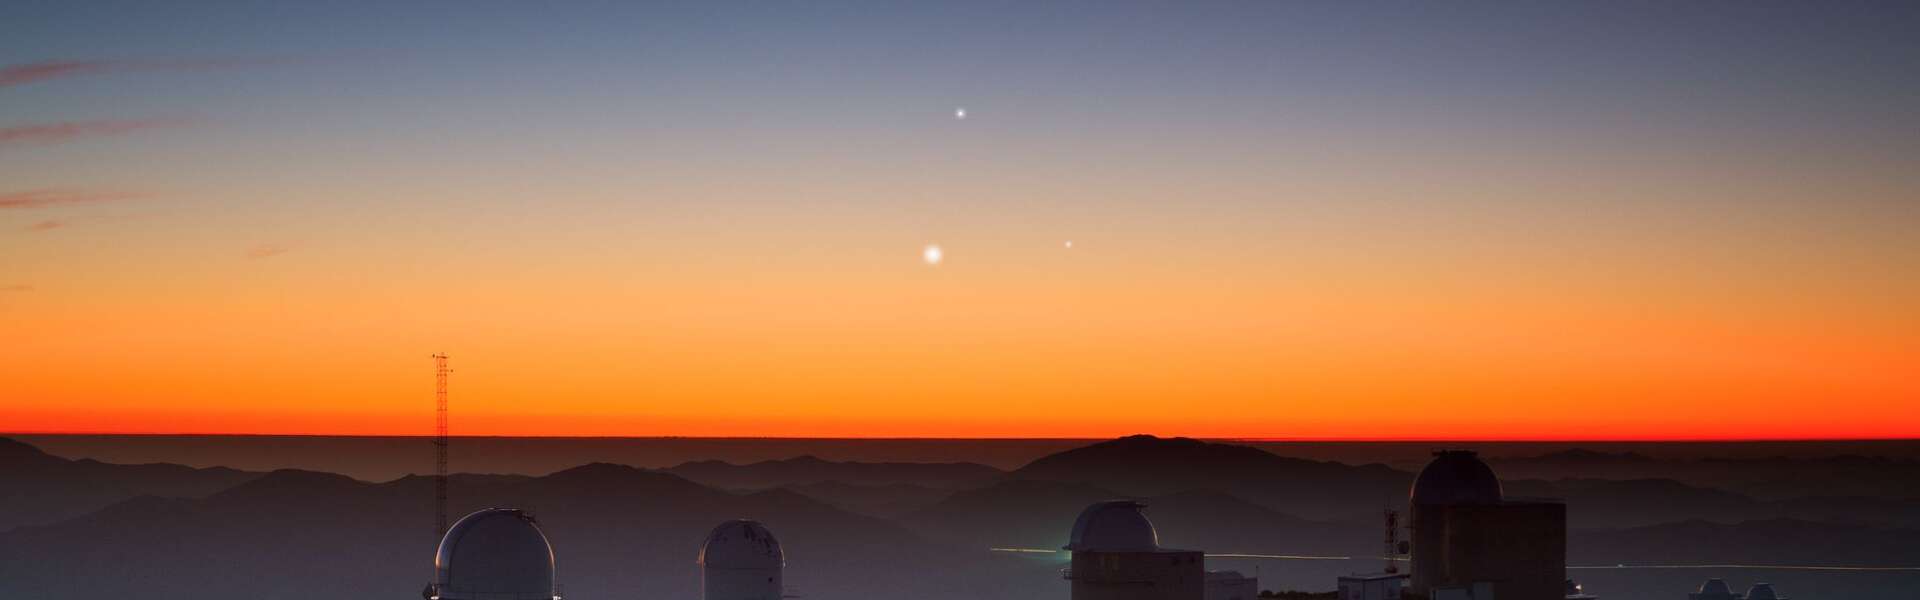 A bright orange sunrise over SO's La Silla Observatory in northern Chile. In the centre of the sky are three shiny lights: Jupiter (top), Venus (lower left), and Mercury (lower right) forming a triangle.